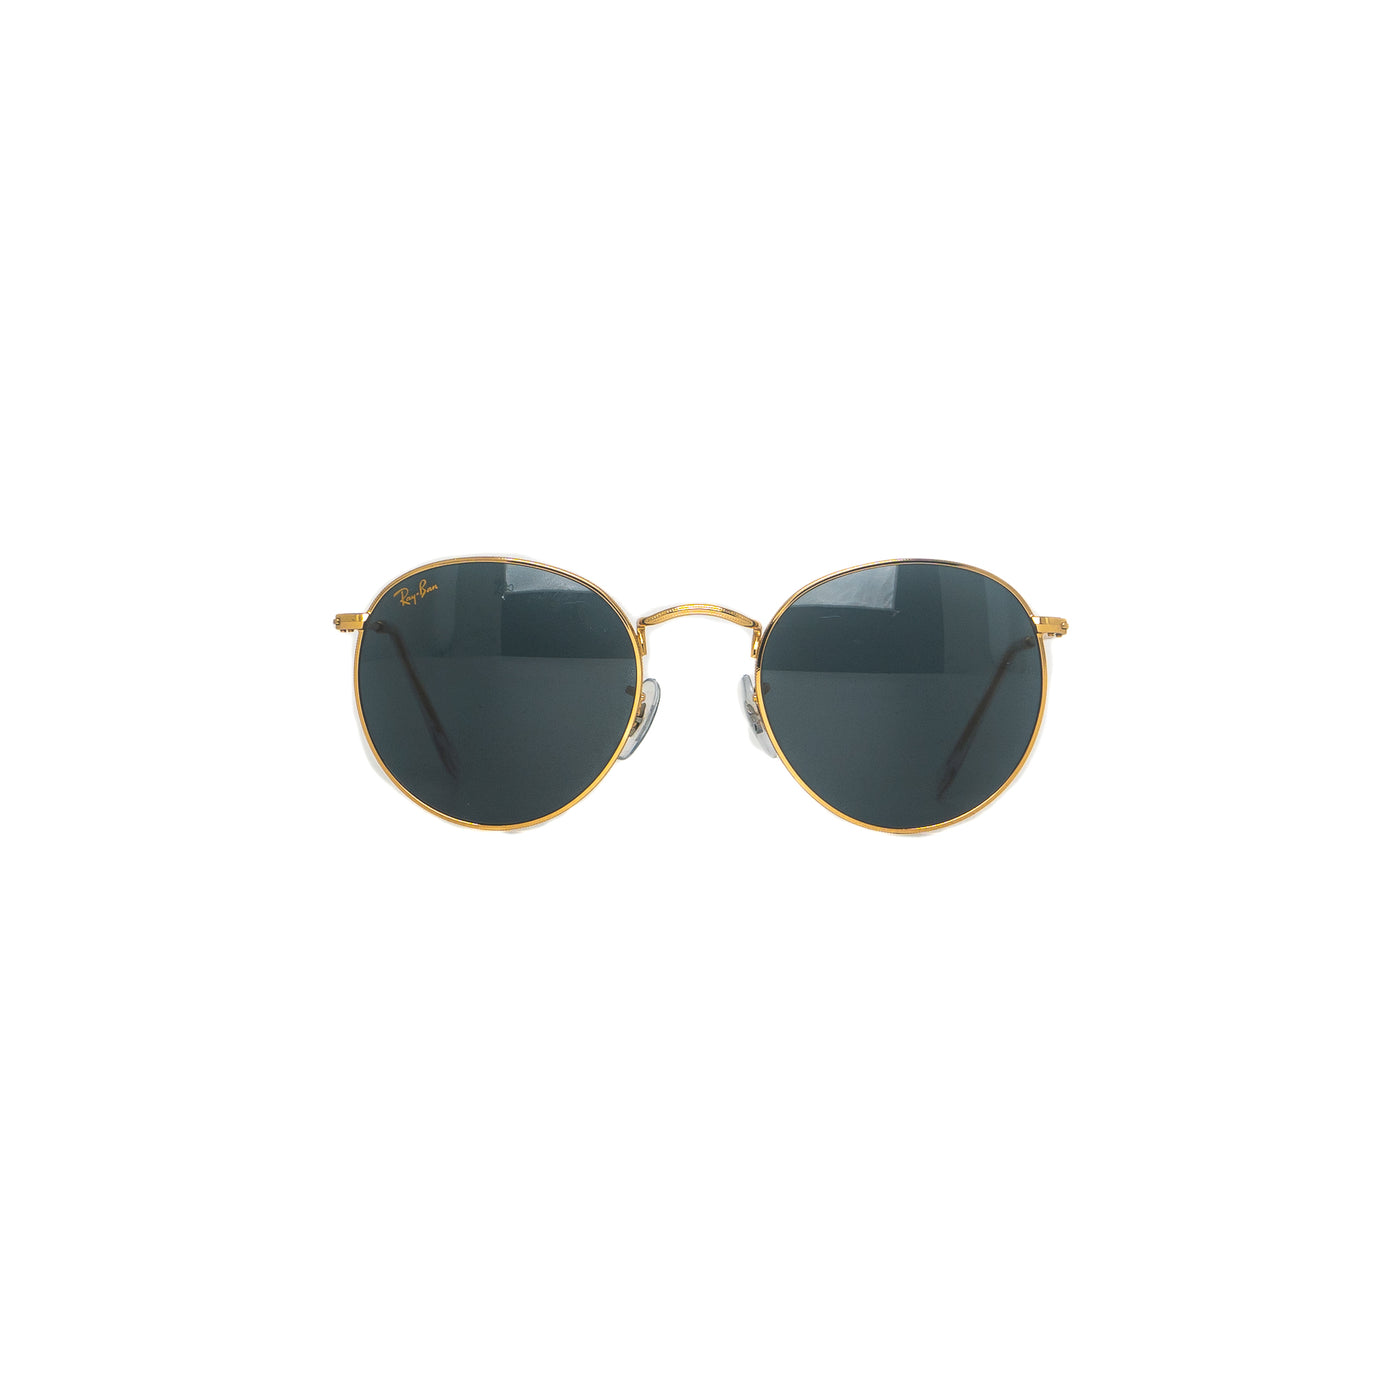 Ray-Ban Round Metal Legend Gold RB3447/9196/R5 | Sunglasses - Vision Express Optical Philippines